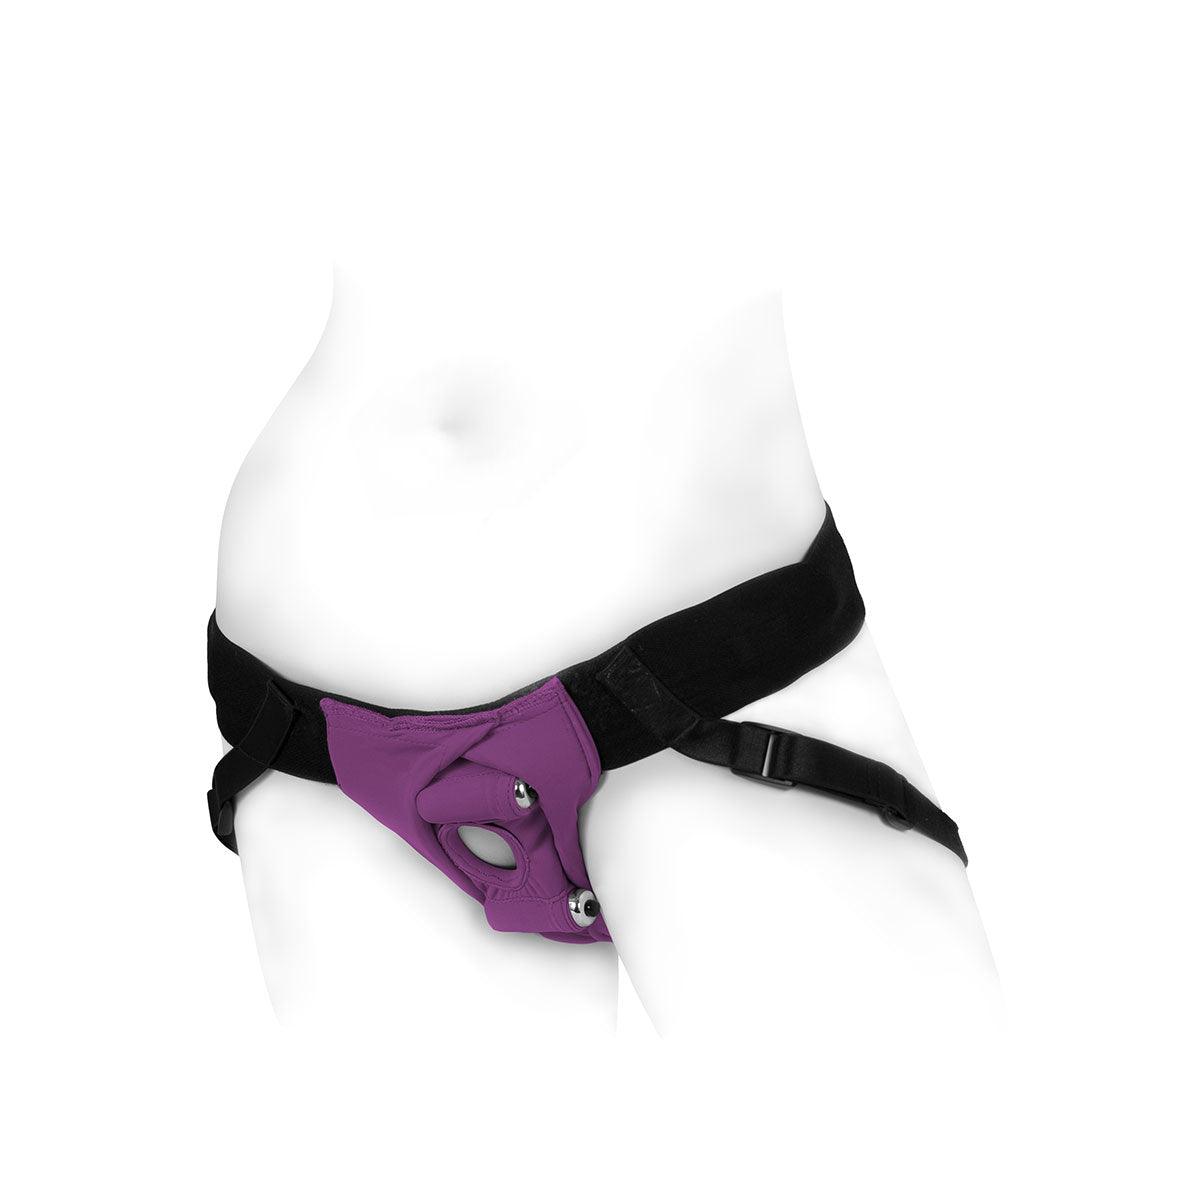 Only Panty Pack play Harness Strap-on Briefs Packer wear O-Ring